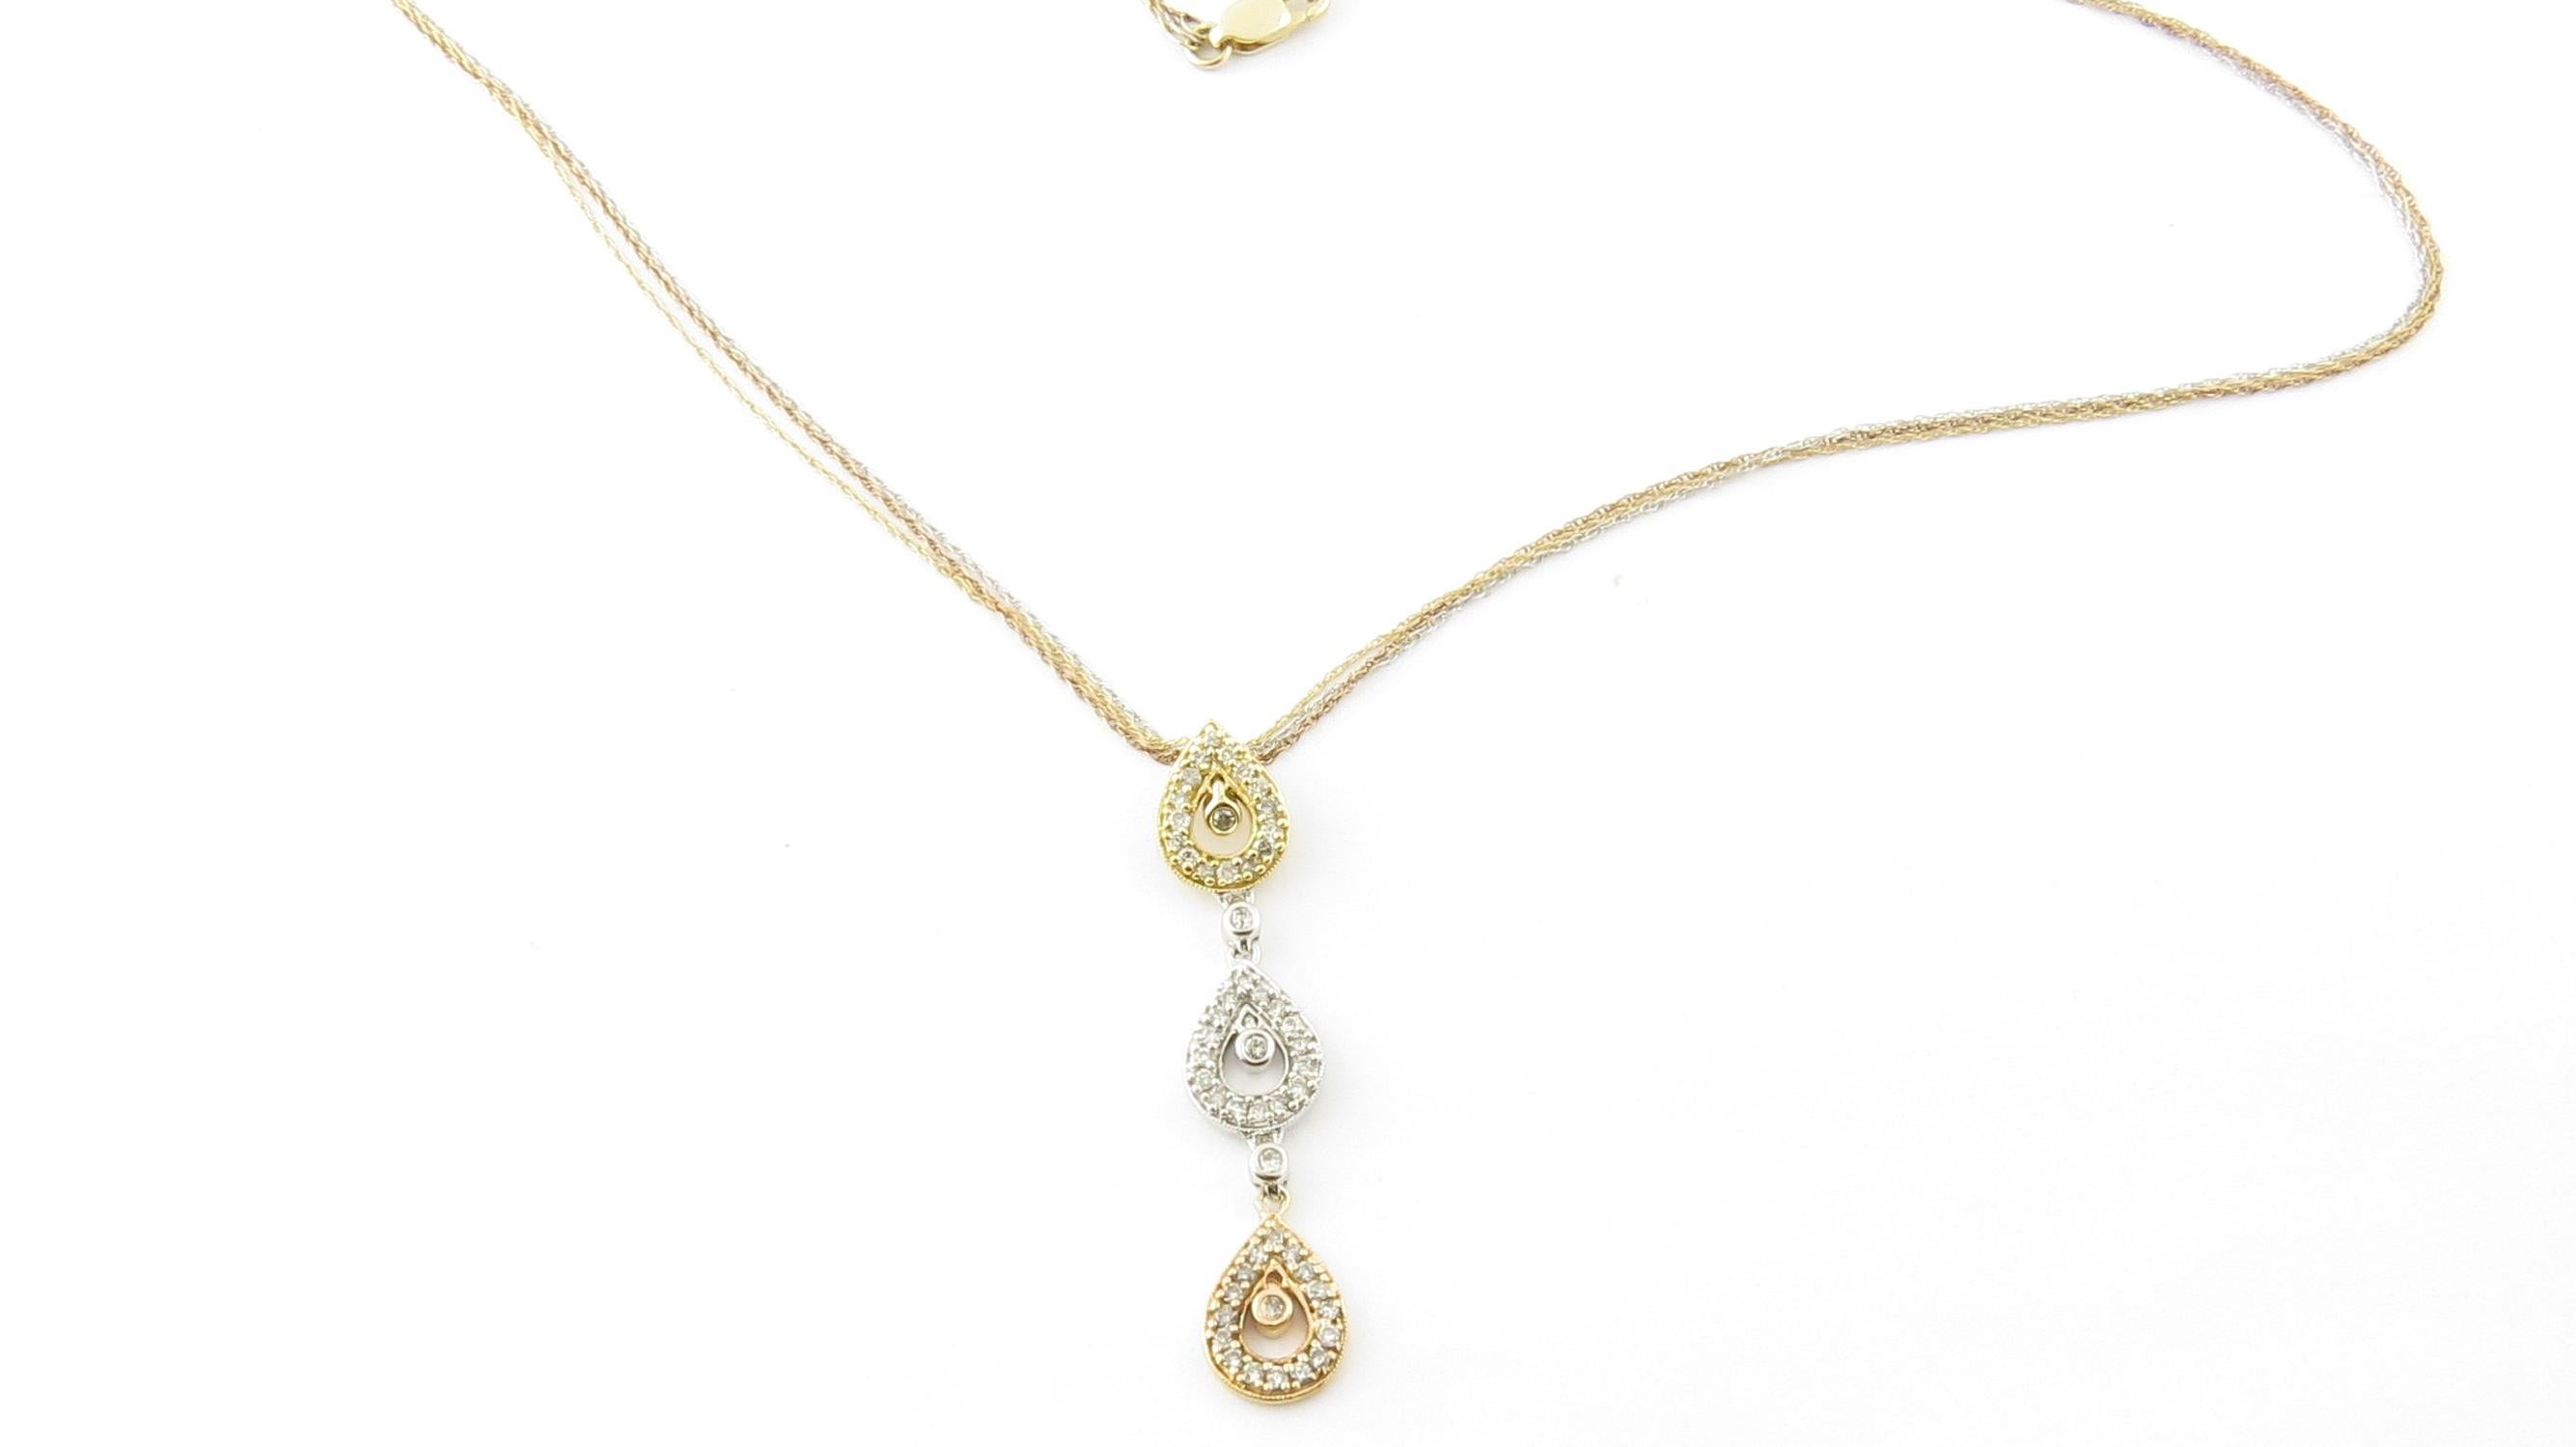 Vintage 14 Karat Yellow, White and Rose Gold Diamond Pendant Necklace #4374 In Good Condition For Sale In Washington Depot, CT